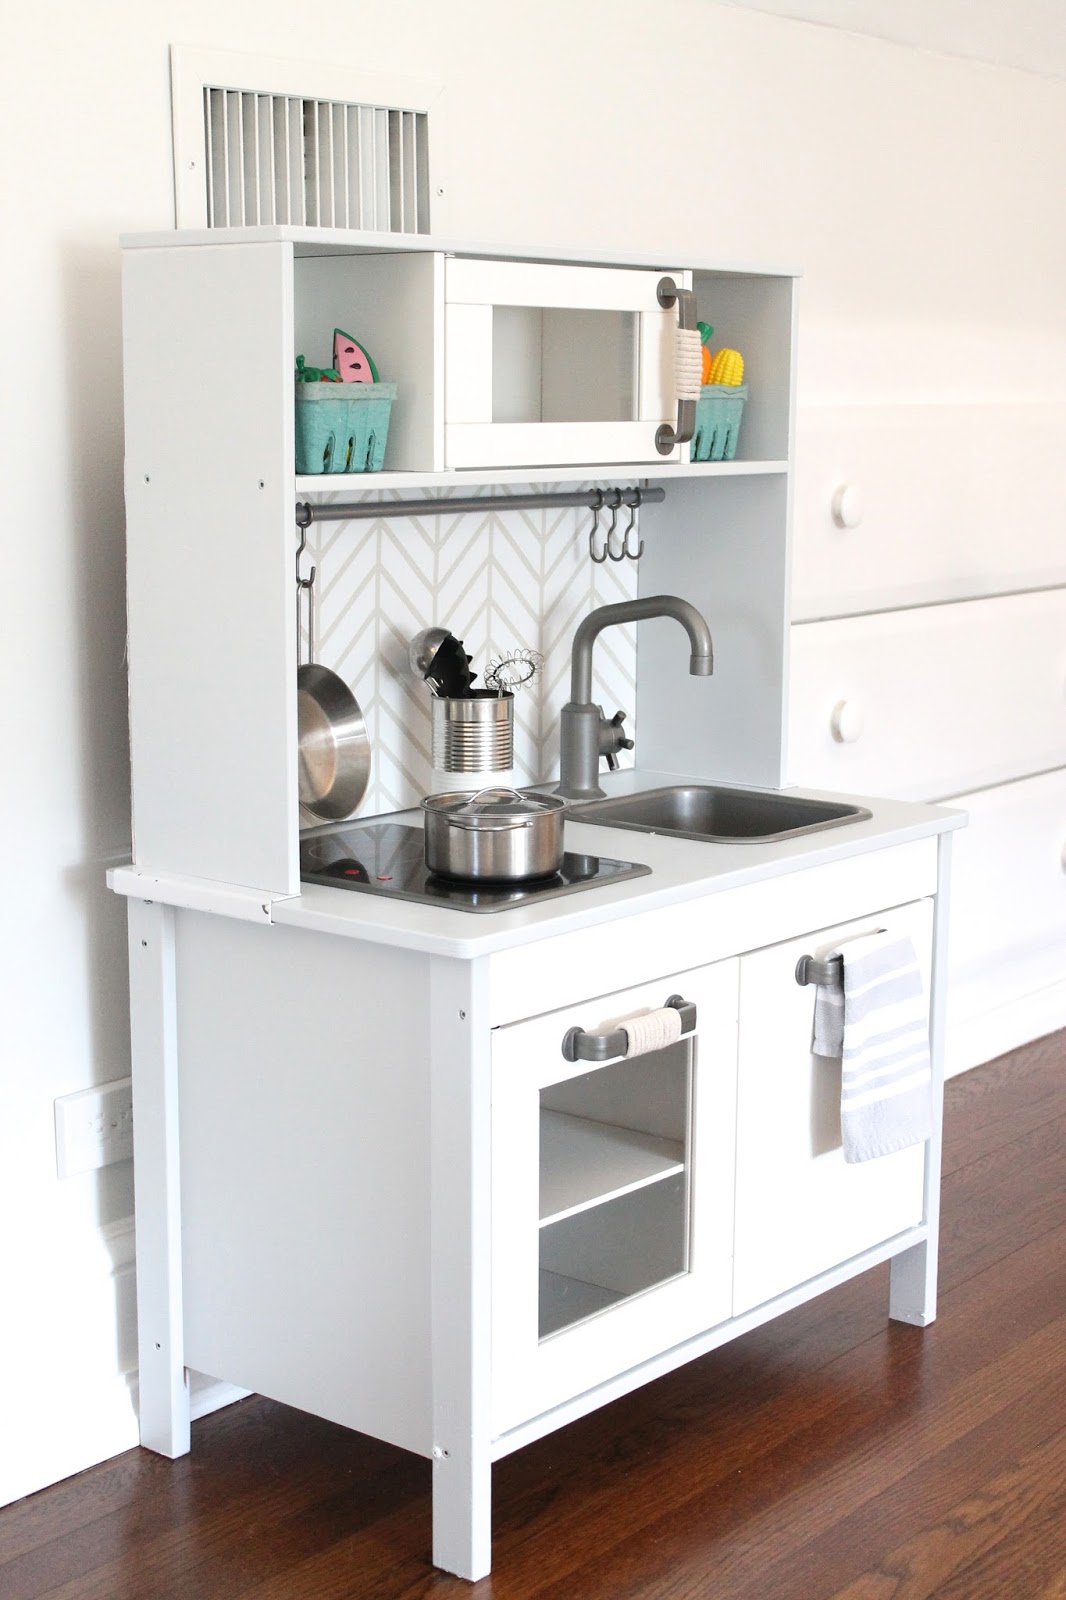 The Picket Fence Projects Kiddie Kitchen Renovation